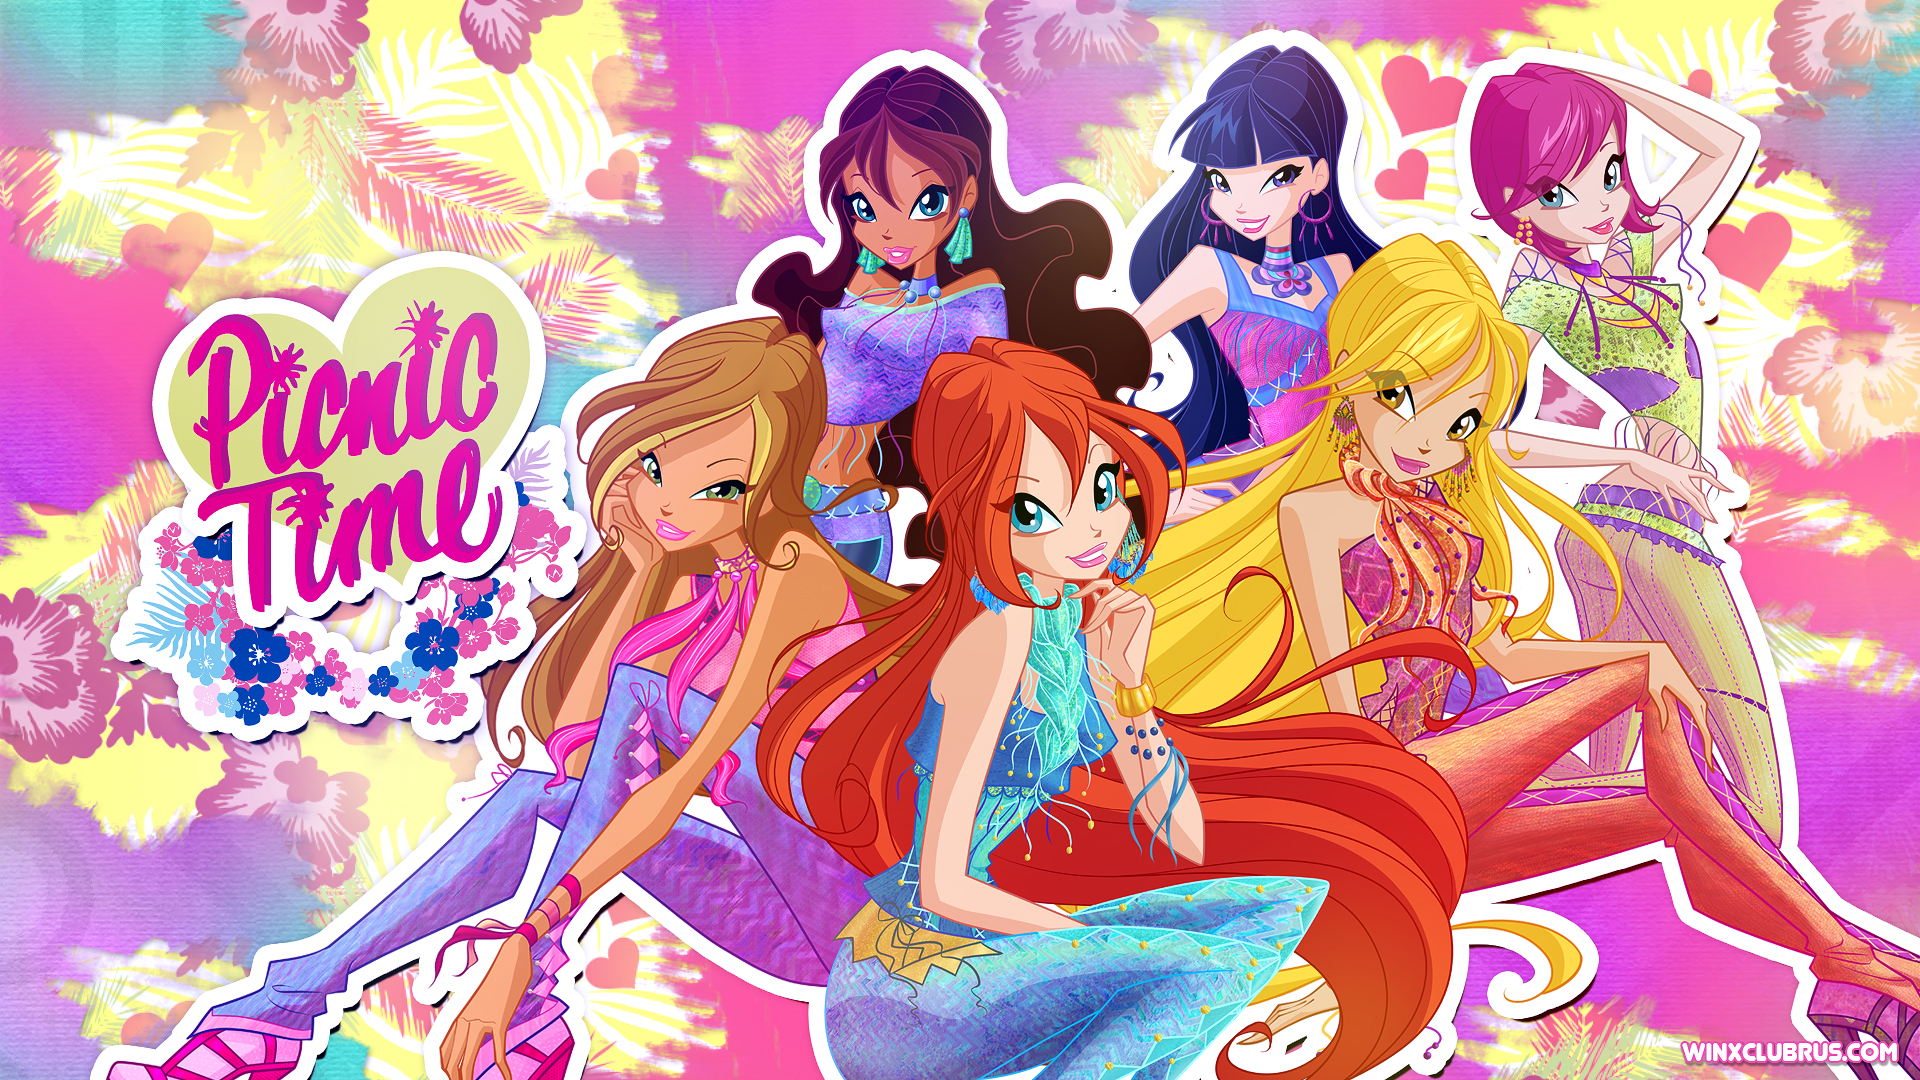 Winx Club new bright and colorful wallpapers with lots of transformations and styles